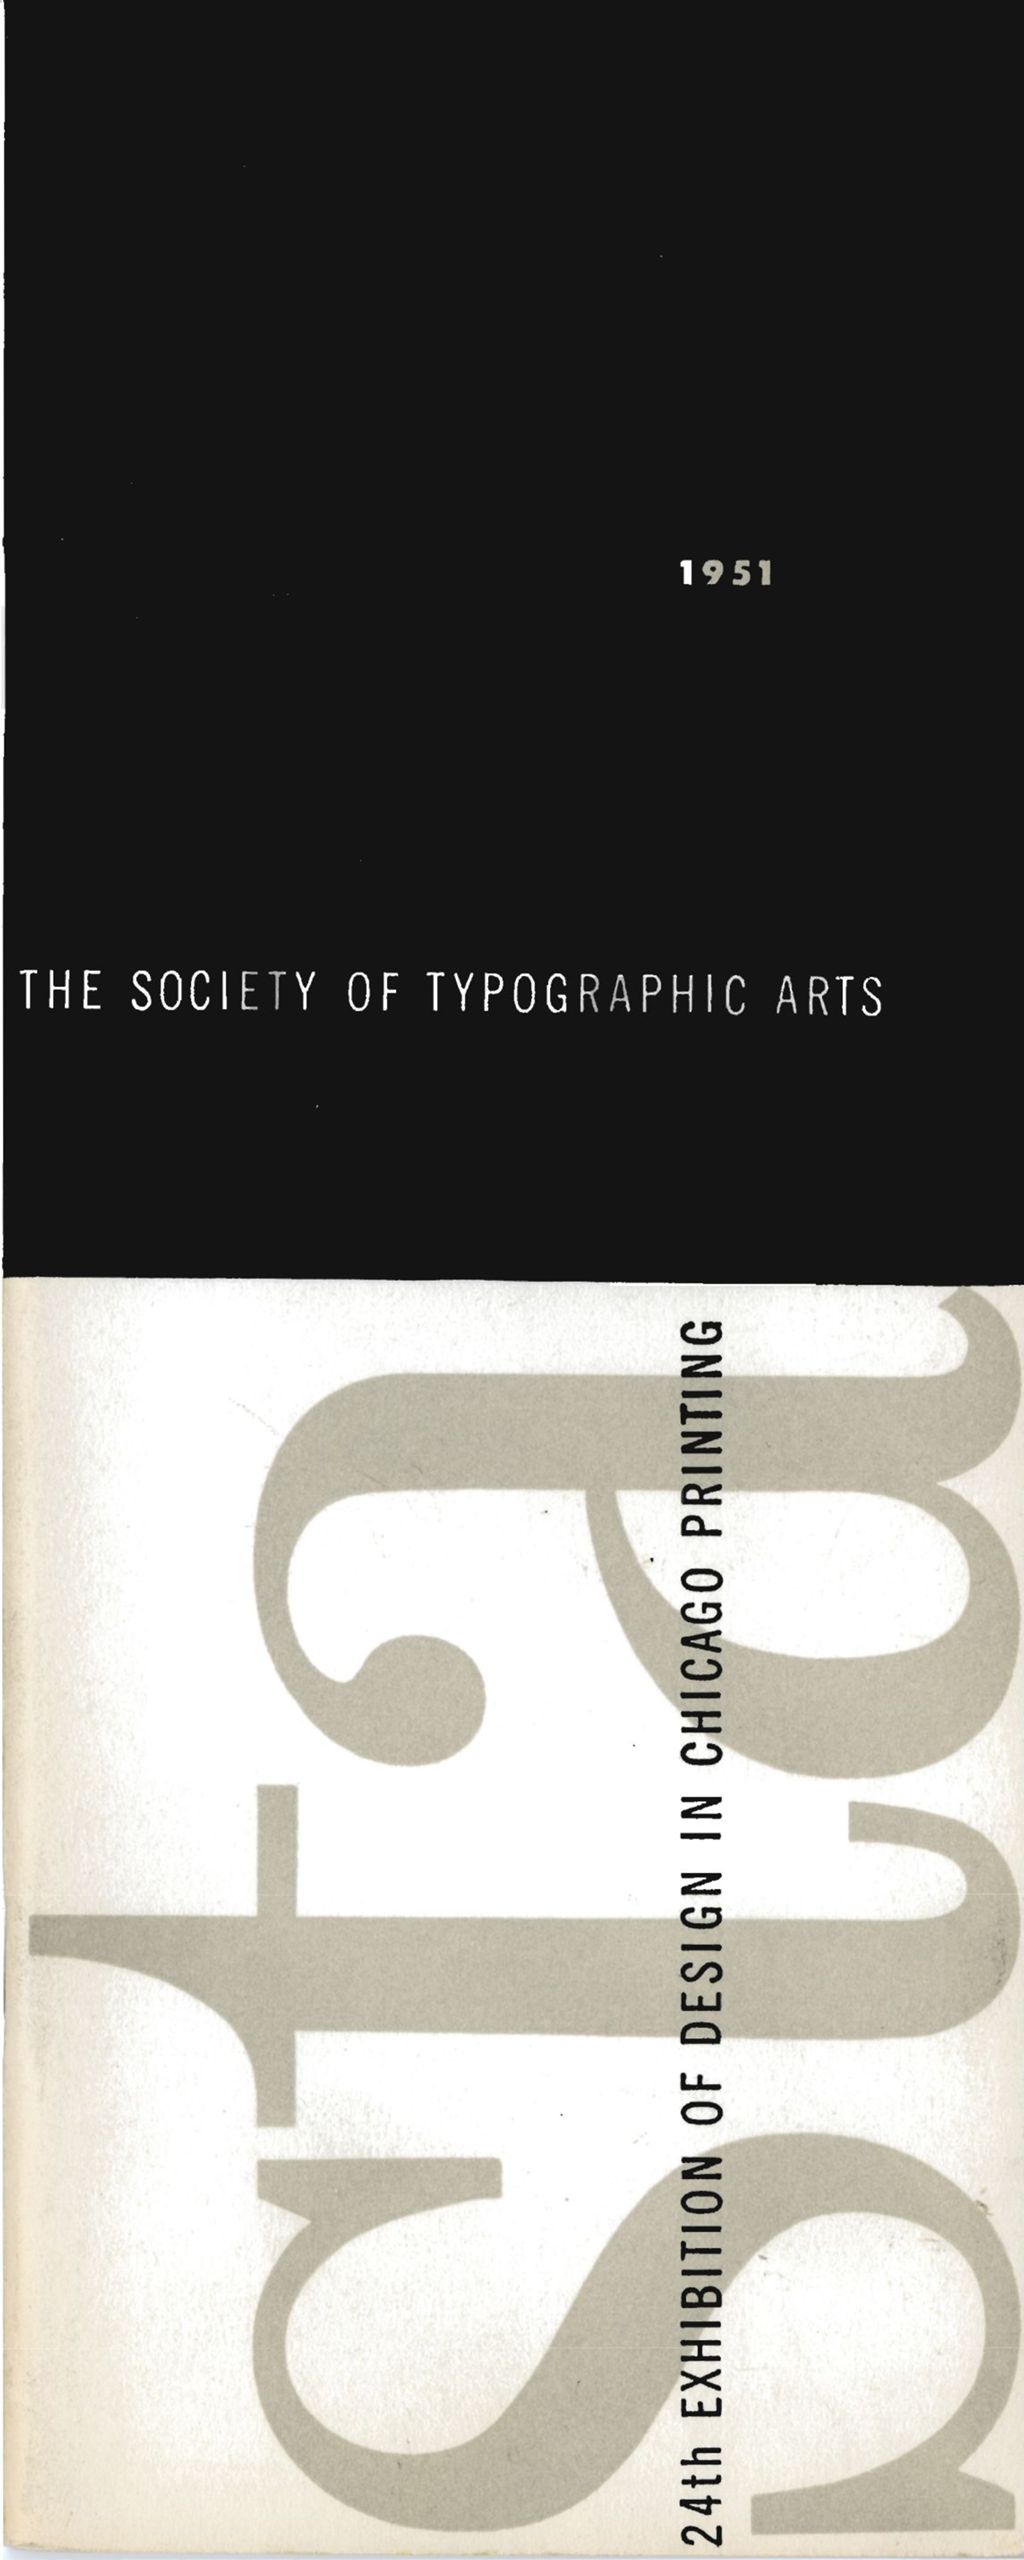 The Society of Typographic Arts 24th Annual Exhibition of Design in Chicago Printing